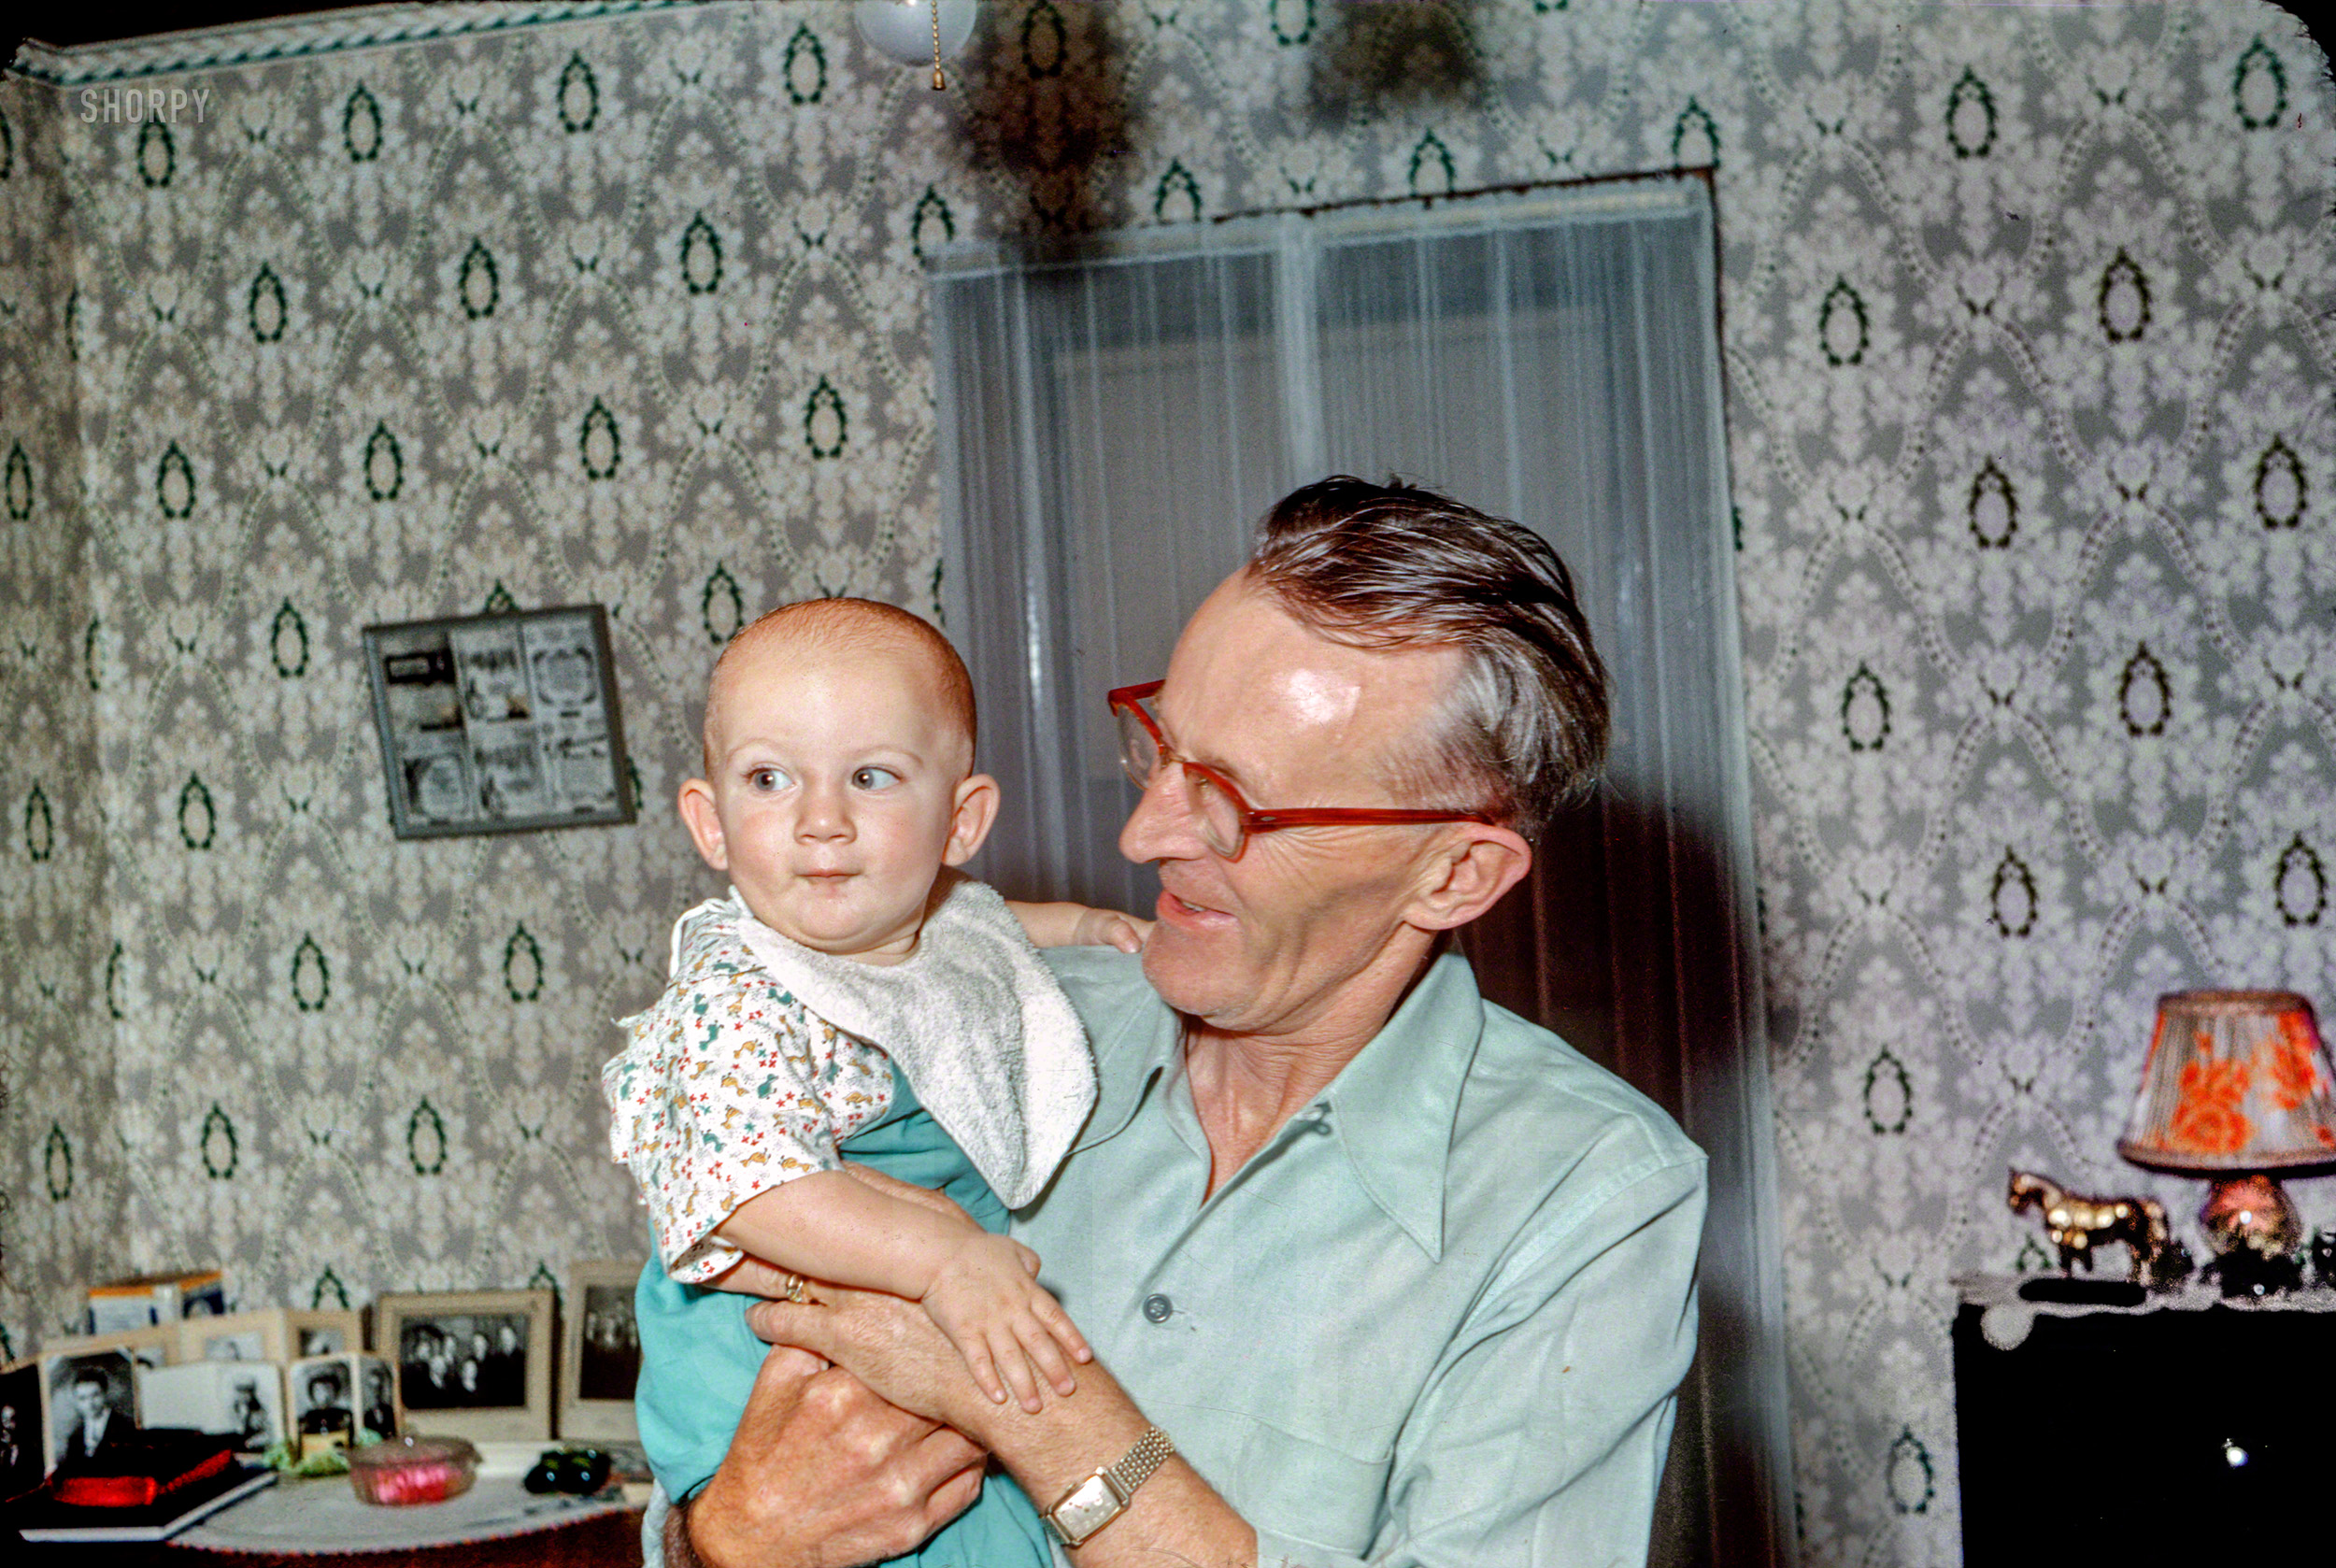 August 10, 1952. "Art Frandle and Steven Lee (10 months)." The latest dispatch from Blue Earth, Minnesota. Kodachrome by Hubert Tuttle. View full size.